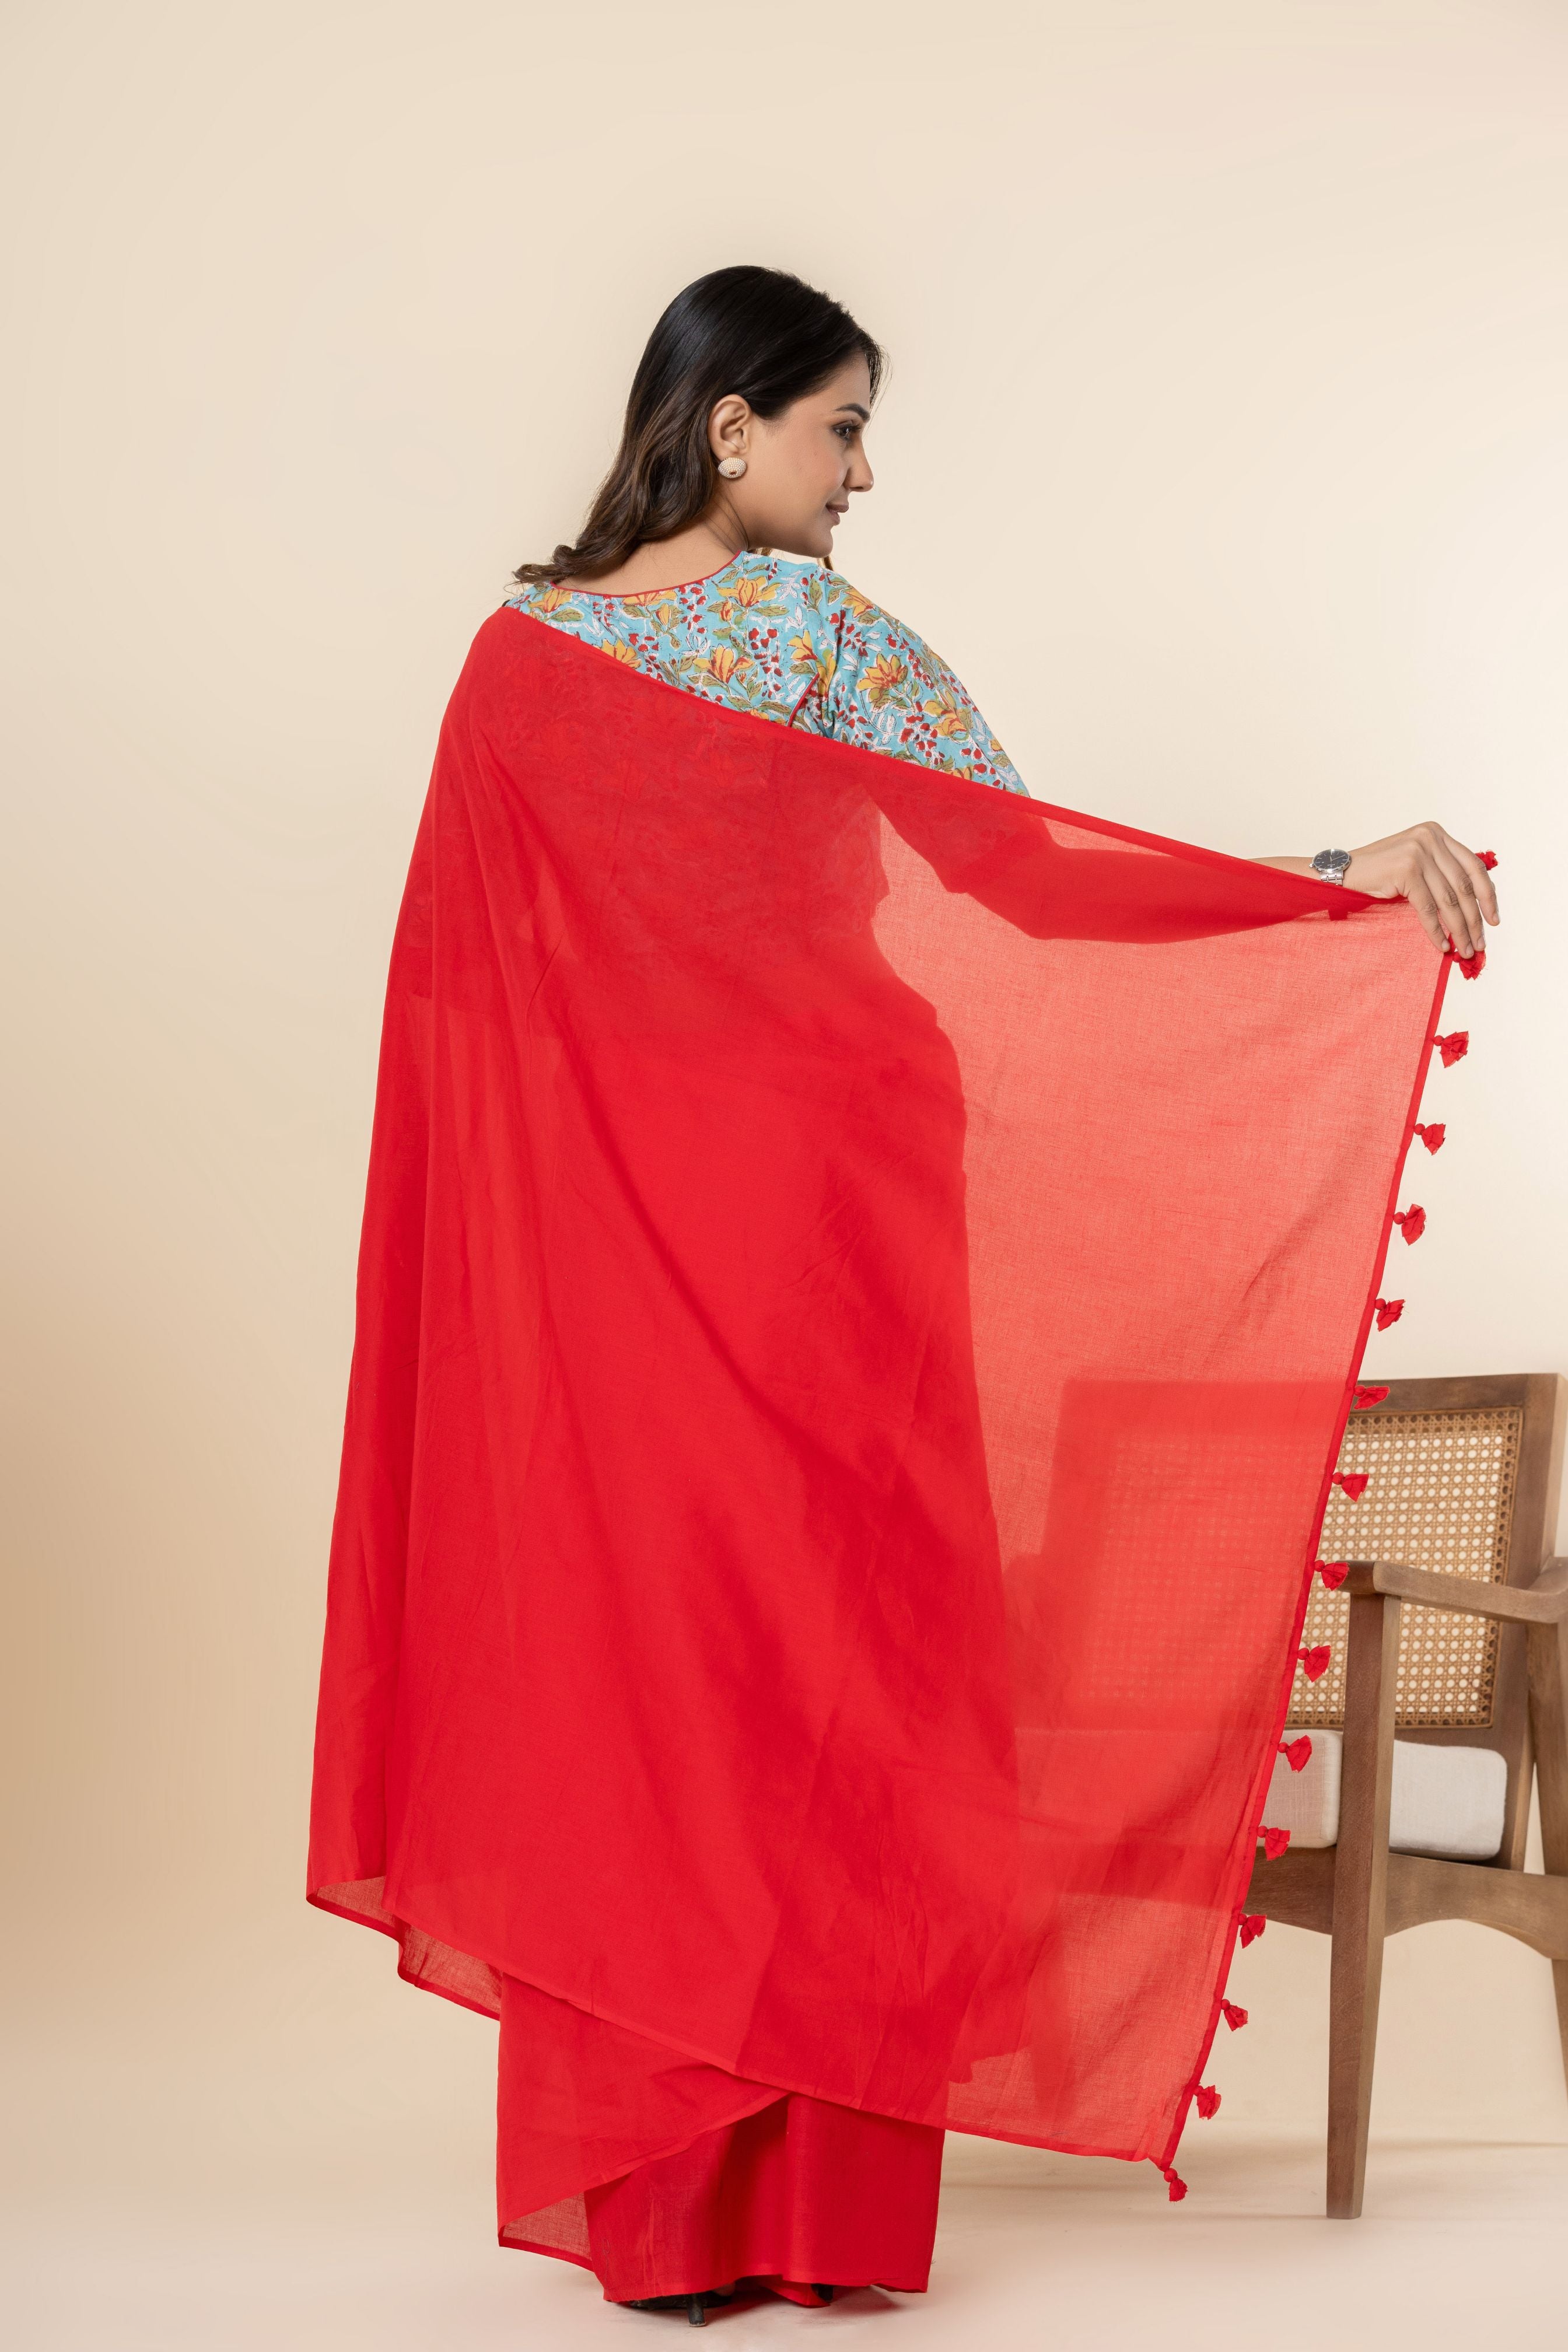 Tomatino Red Plain Dyed Mul Mul Cotton Saree with Tassels (without Blouse)